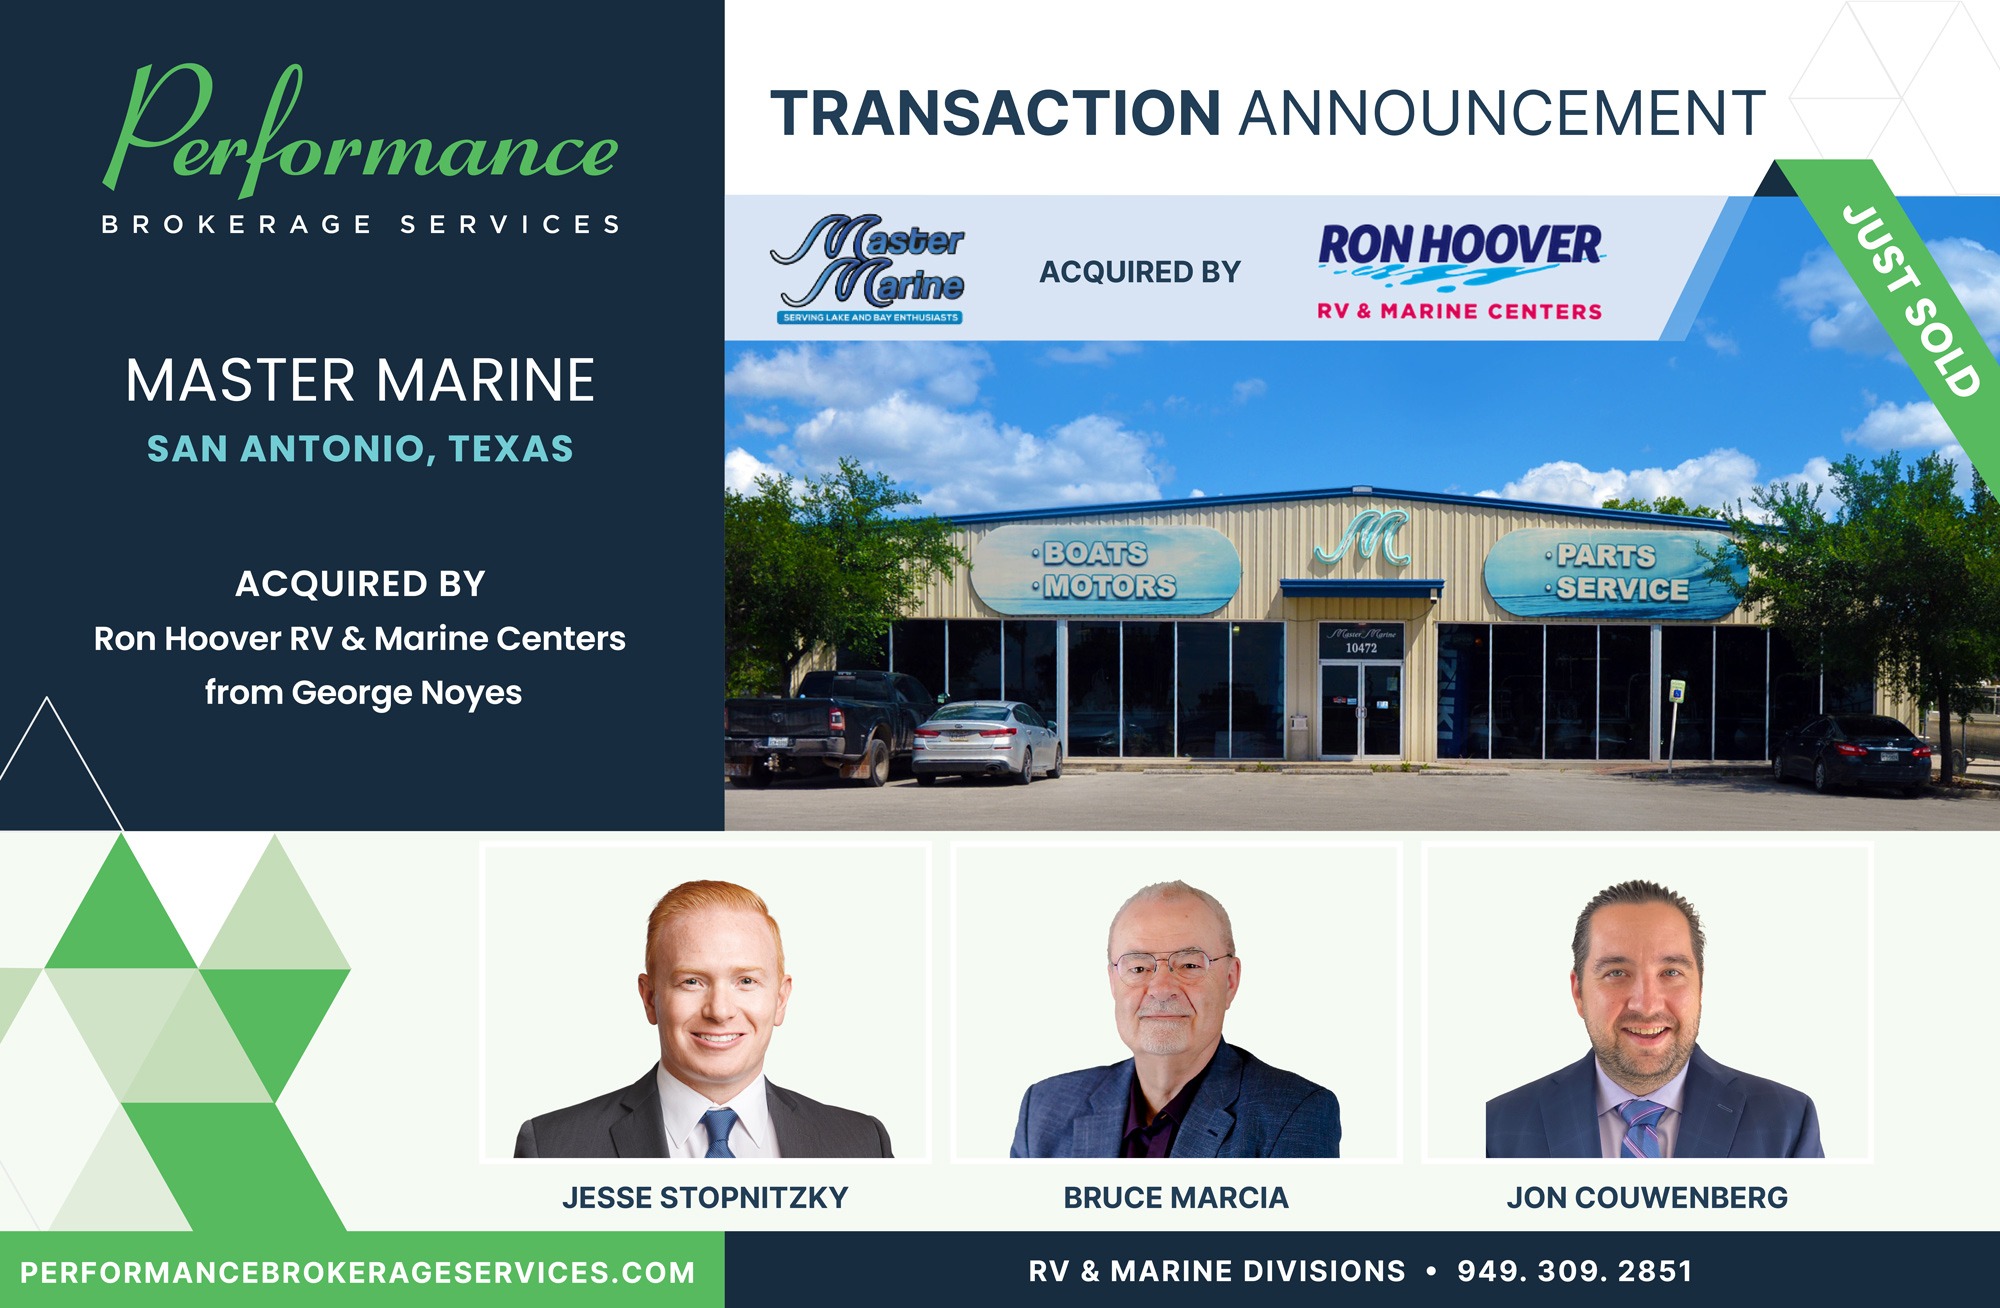 Master Marine sells to Ron Hoover RV & Marine Centers with Performance Brokerage